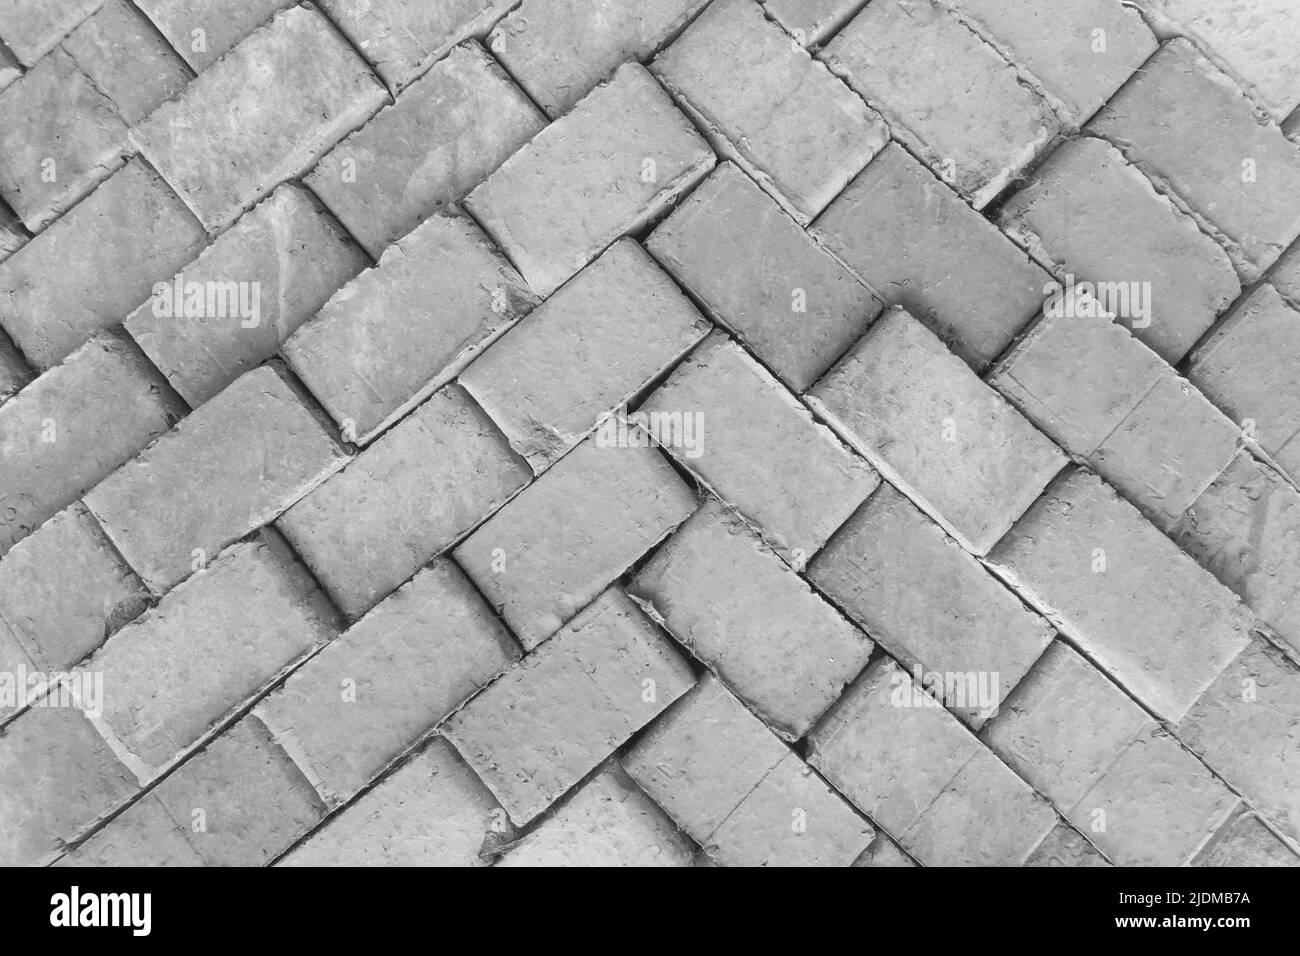 Brick grey old packed building stack construction material masonry pattern texture background. Stock Photo